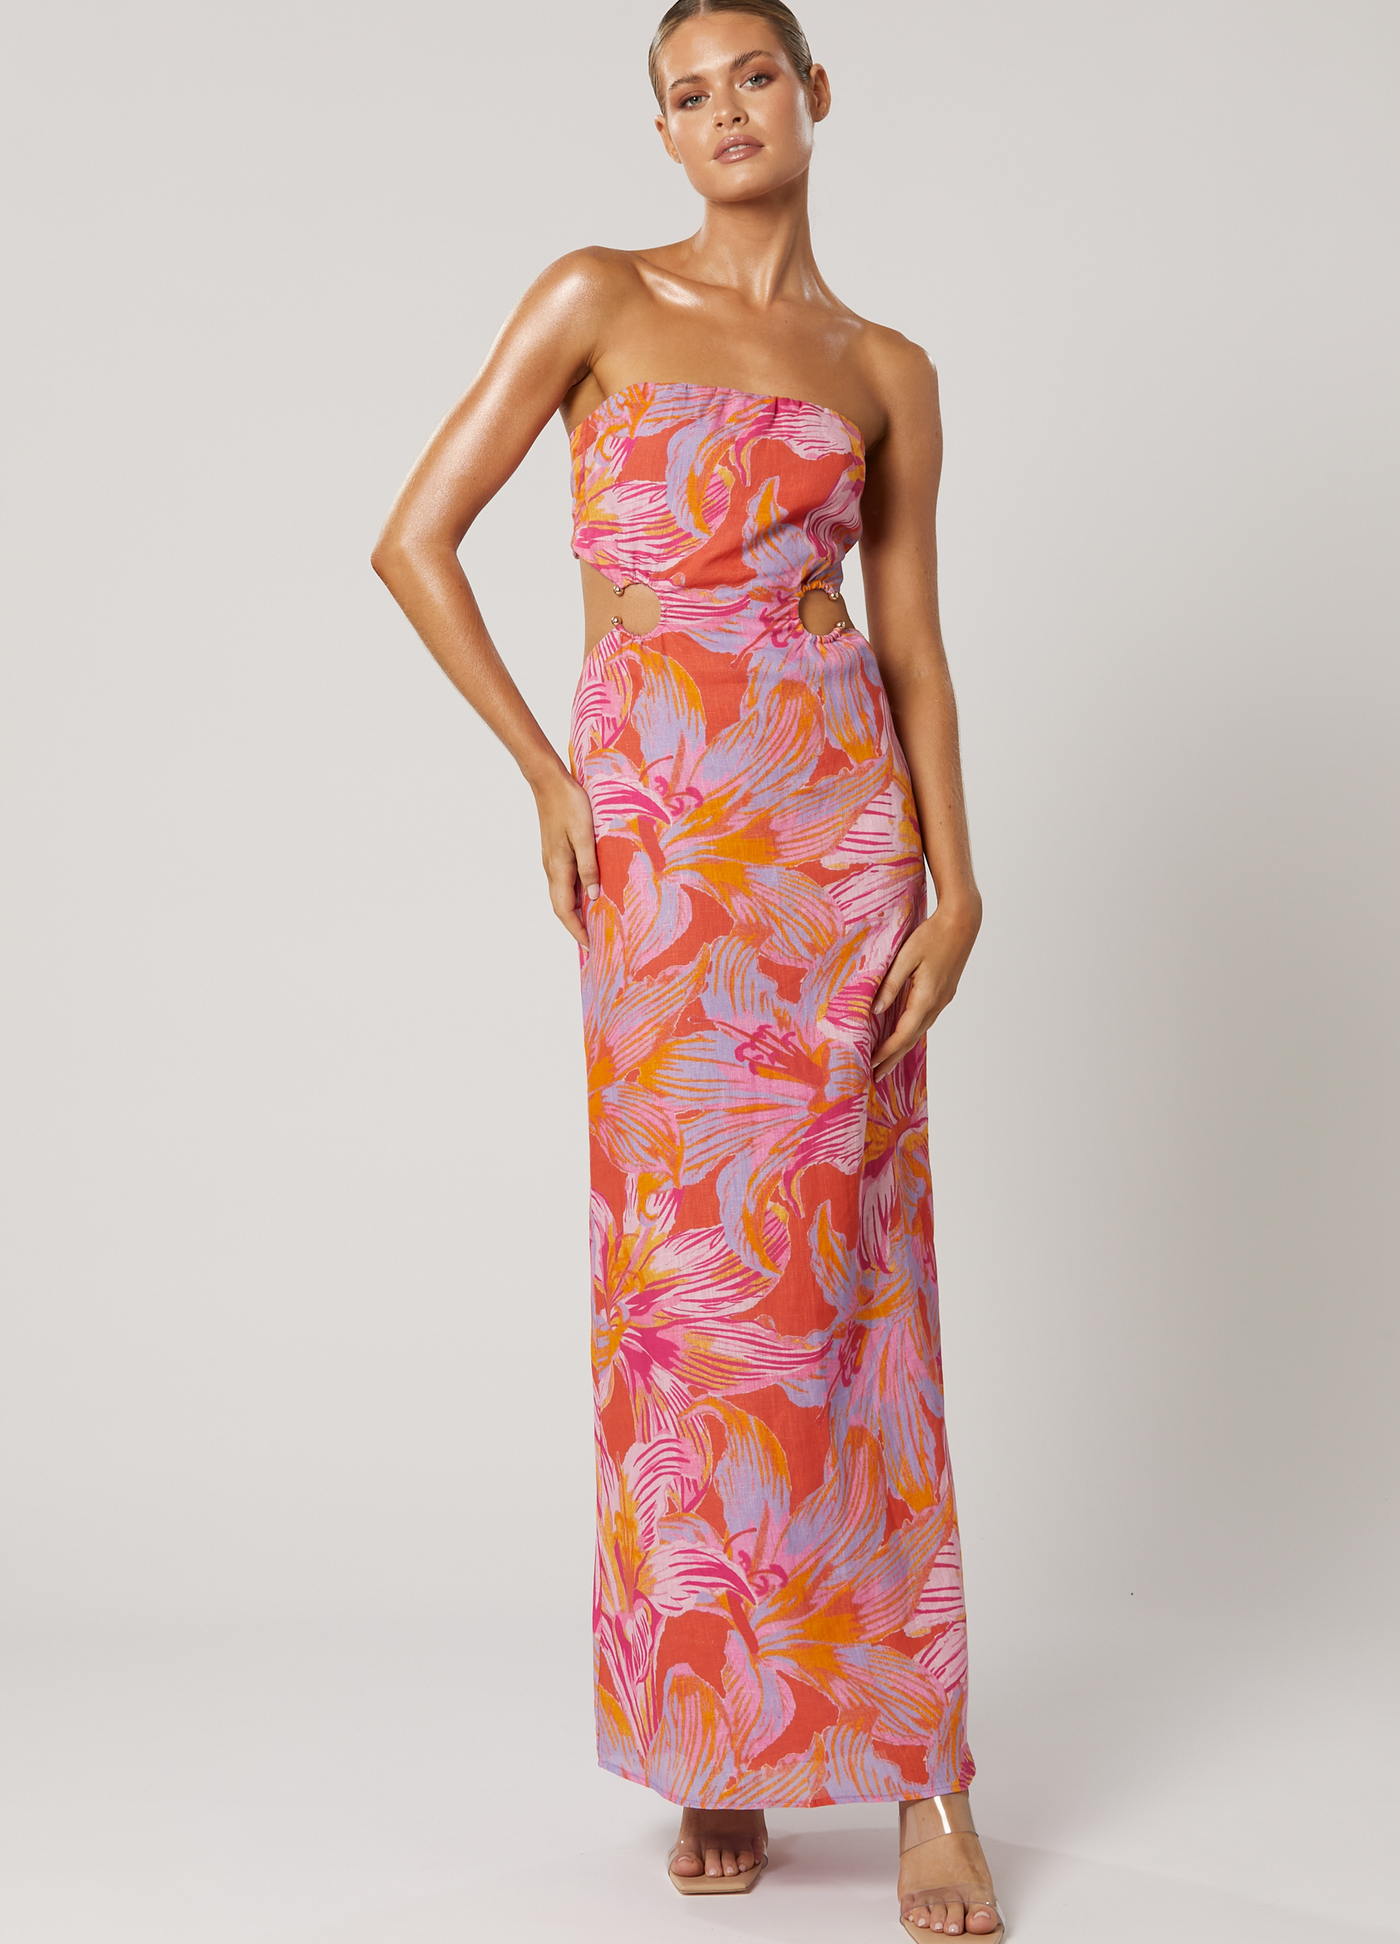 Model wearing the Avalyn Printed Maxi Dress with cut outs and strapless neckline